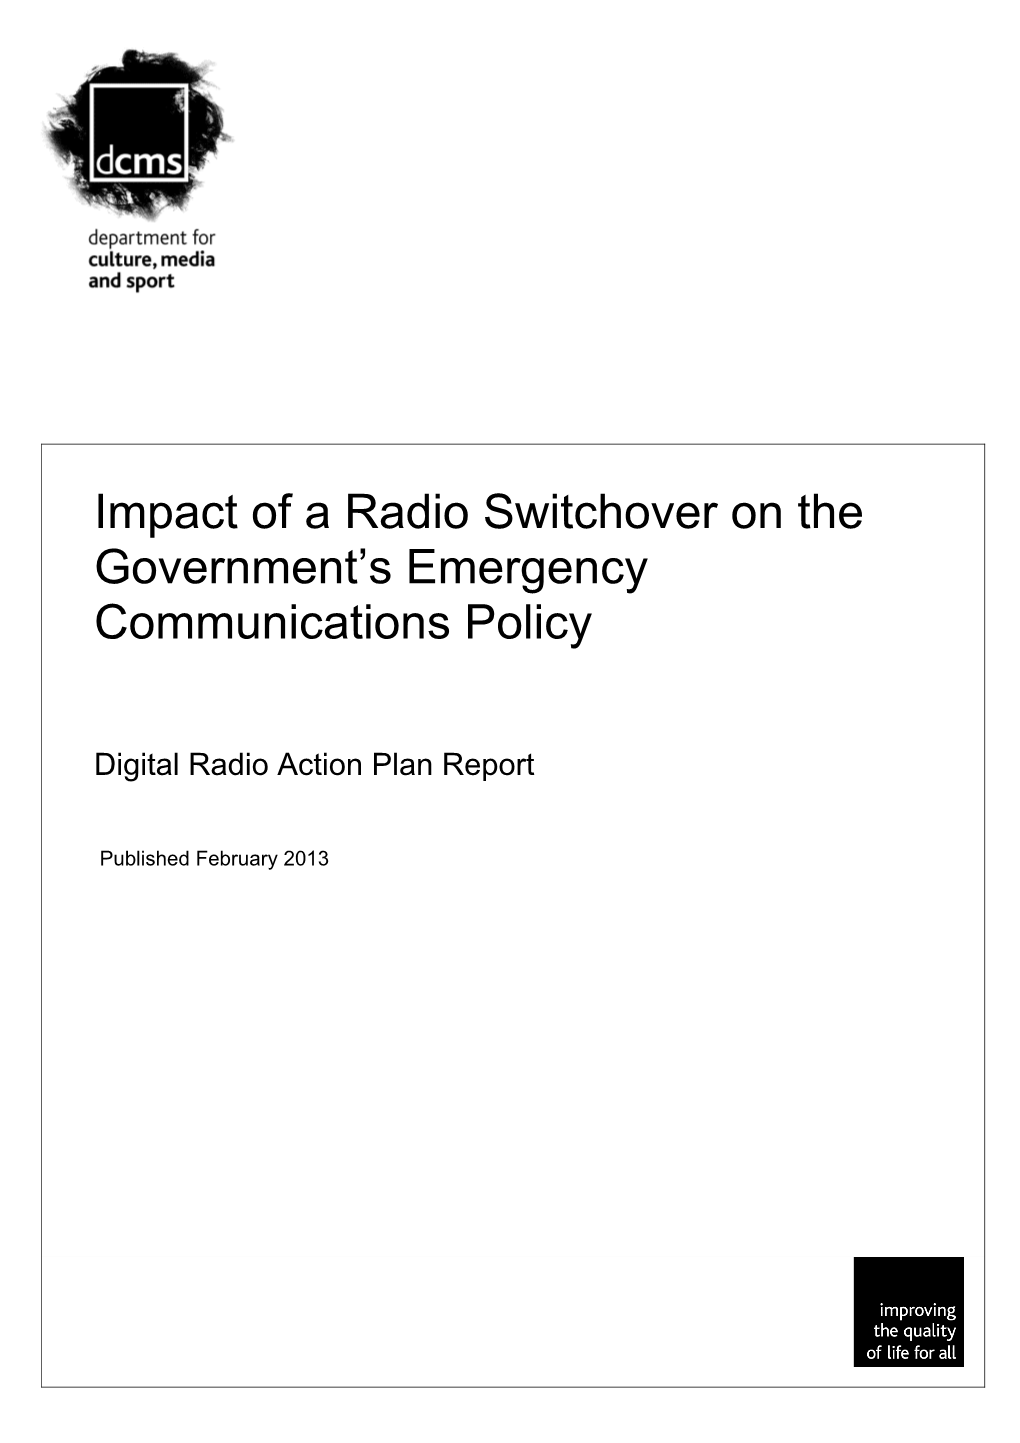 Section 3:Impact of a Radio Switchover on the Government's Emergency Communicationspolicy